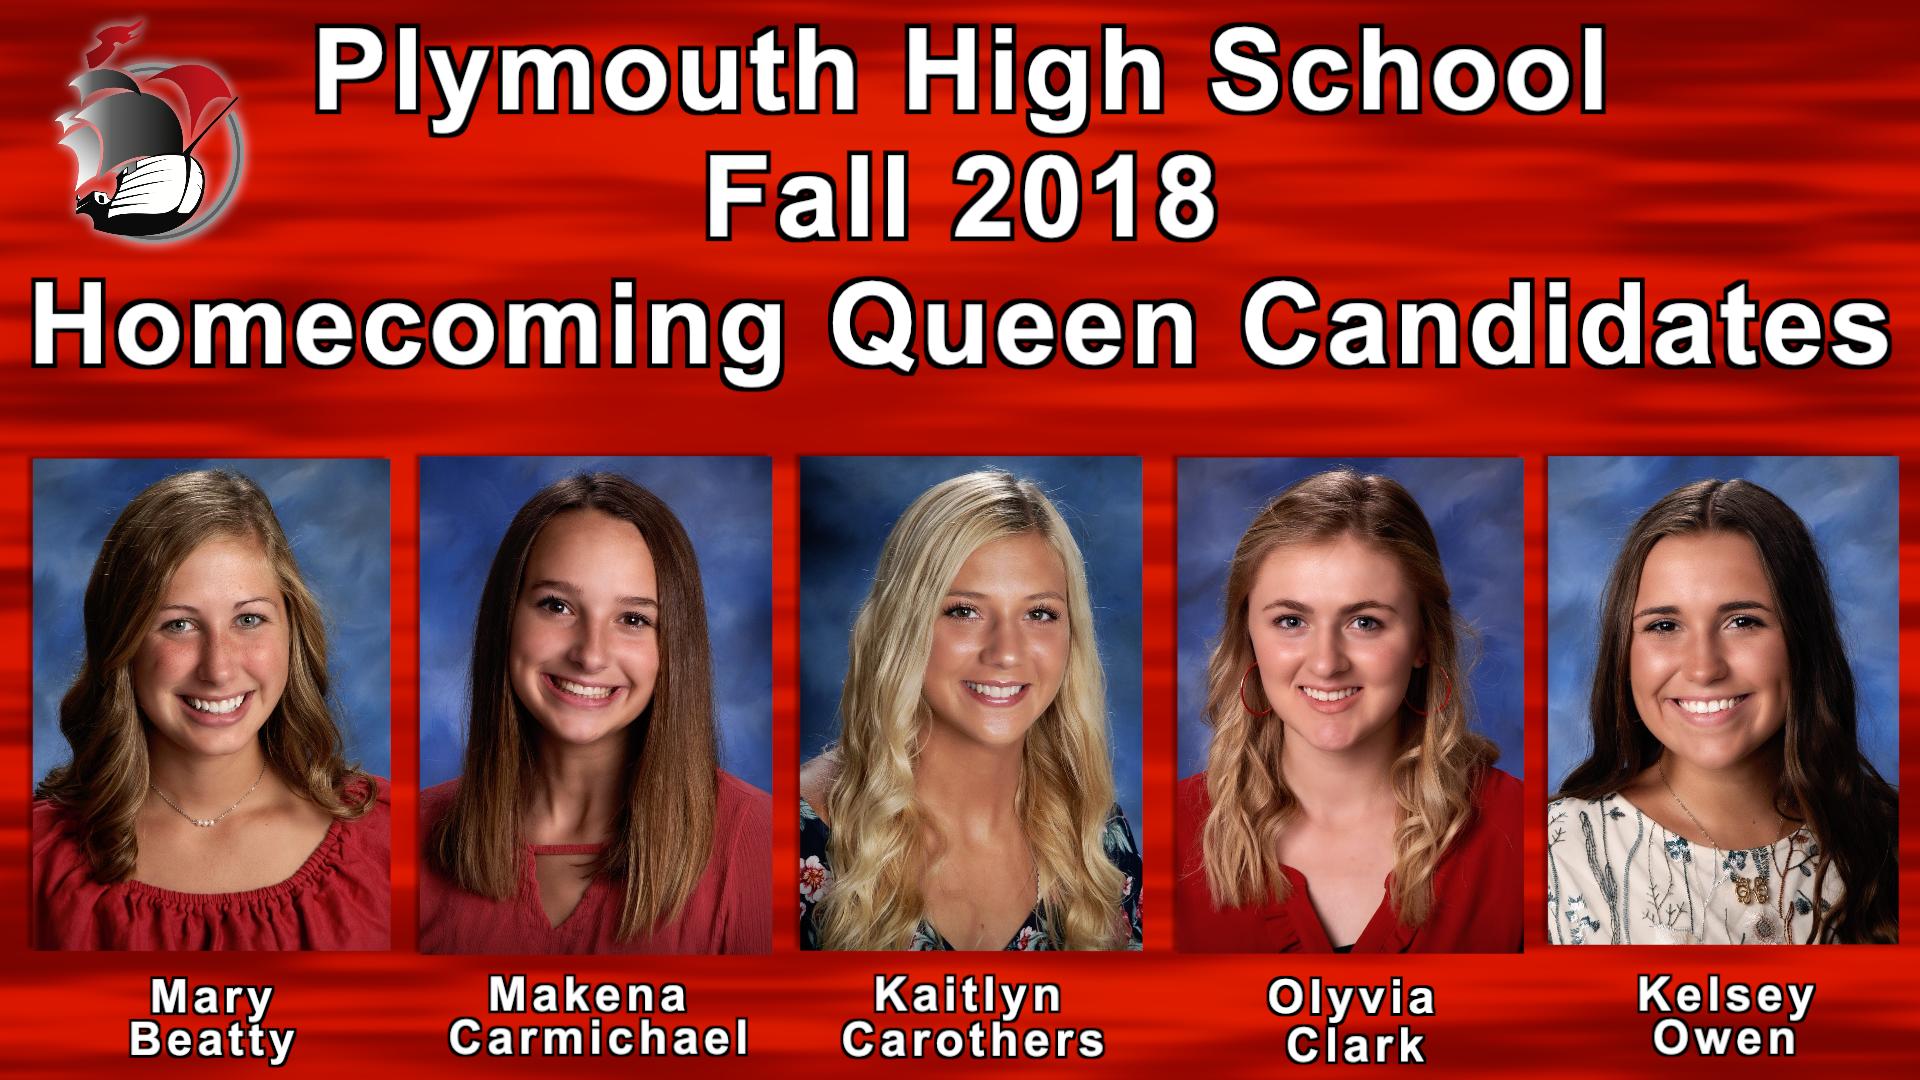 Plymouth High School Fall 2018 Homecoming Queen Candidates - Mary Beatty, Makena Carmichael, Kaitlyn Carothers, Olyvia Clark, and Kelsey Owen